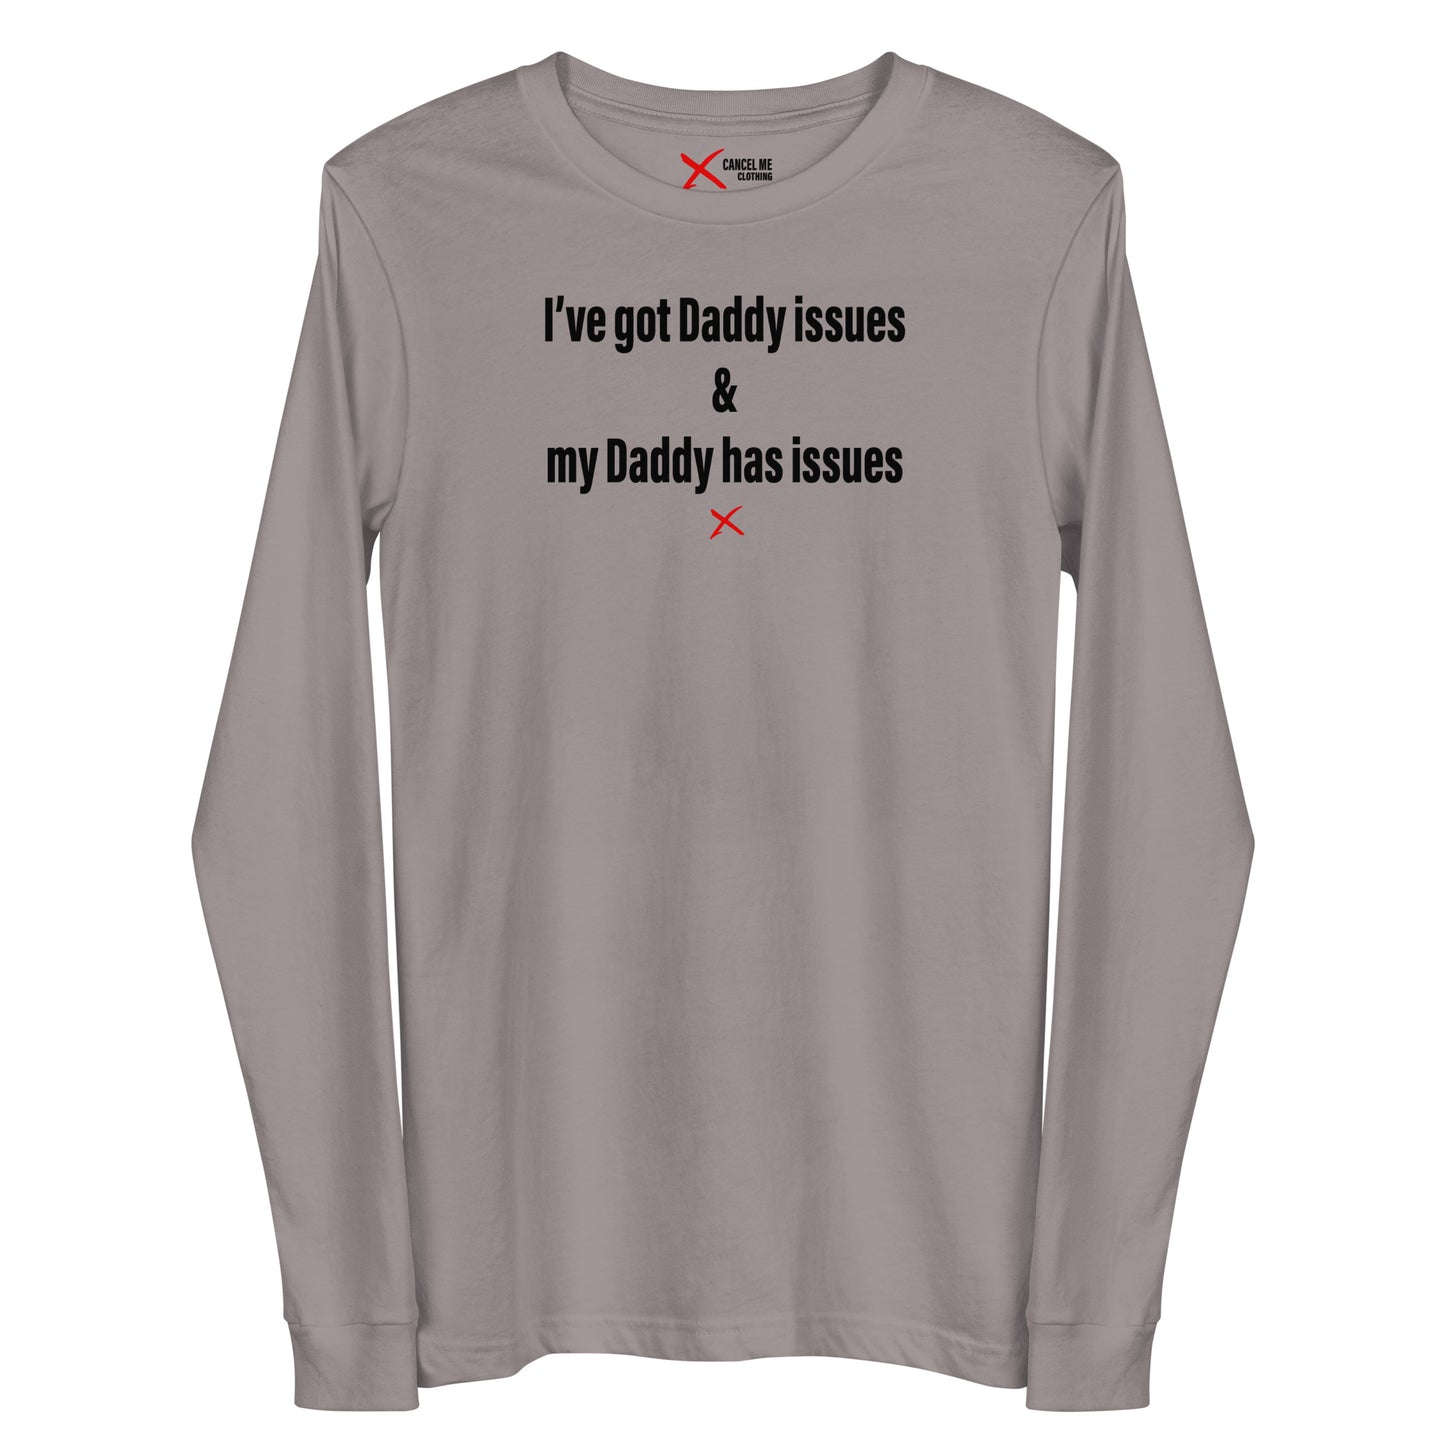 I've got Daddy issues & my Daddy has issues - Longsleeve